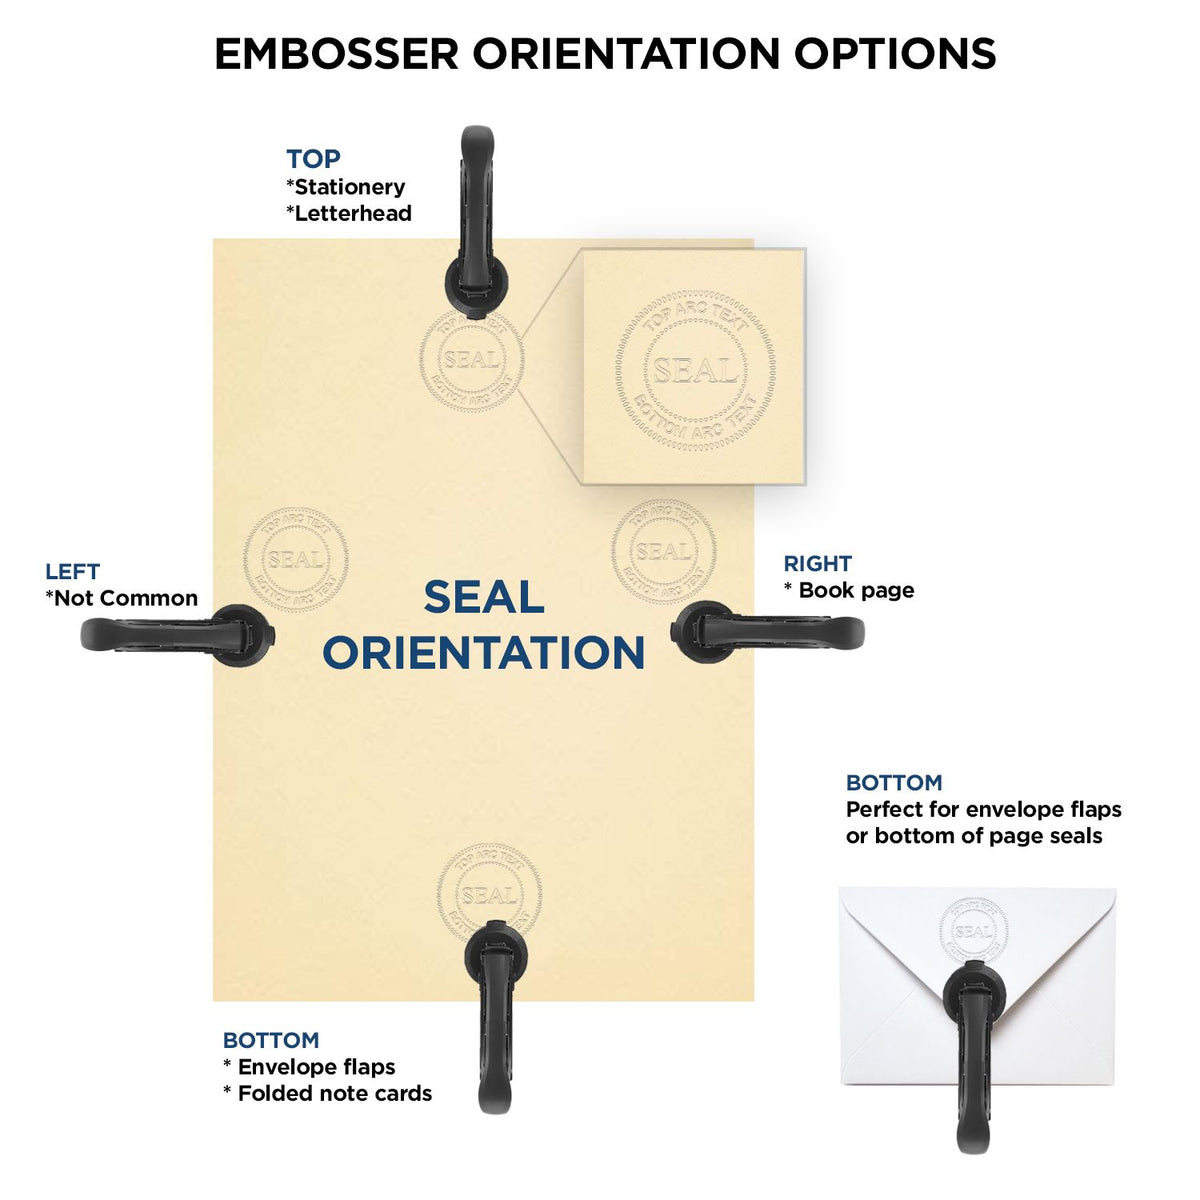 An infographic for the Heavy Duty Cast Iron California Engineer Seal Embosser showing embosser orientation, this is showing examples of a top, bottom, right and left insert.